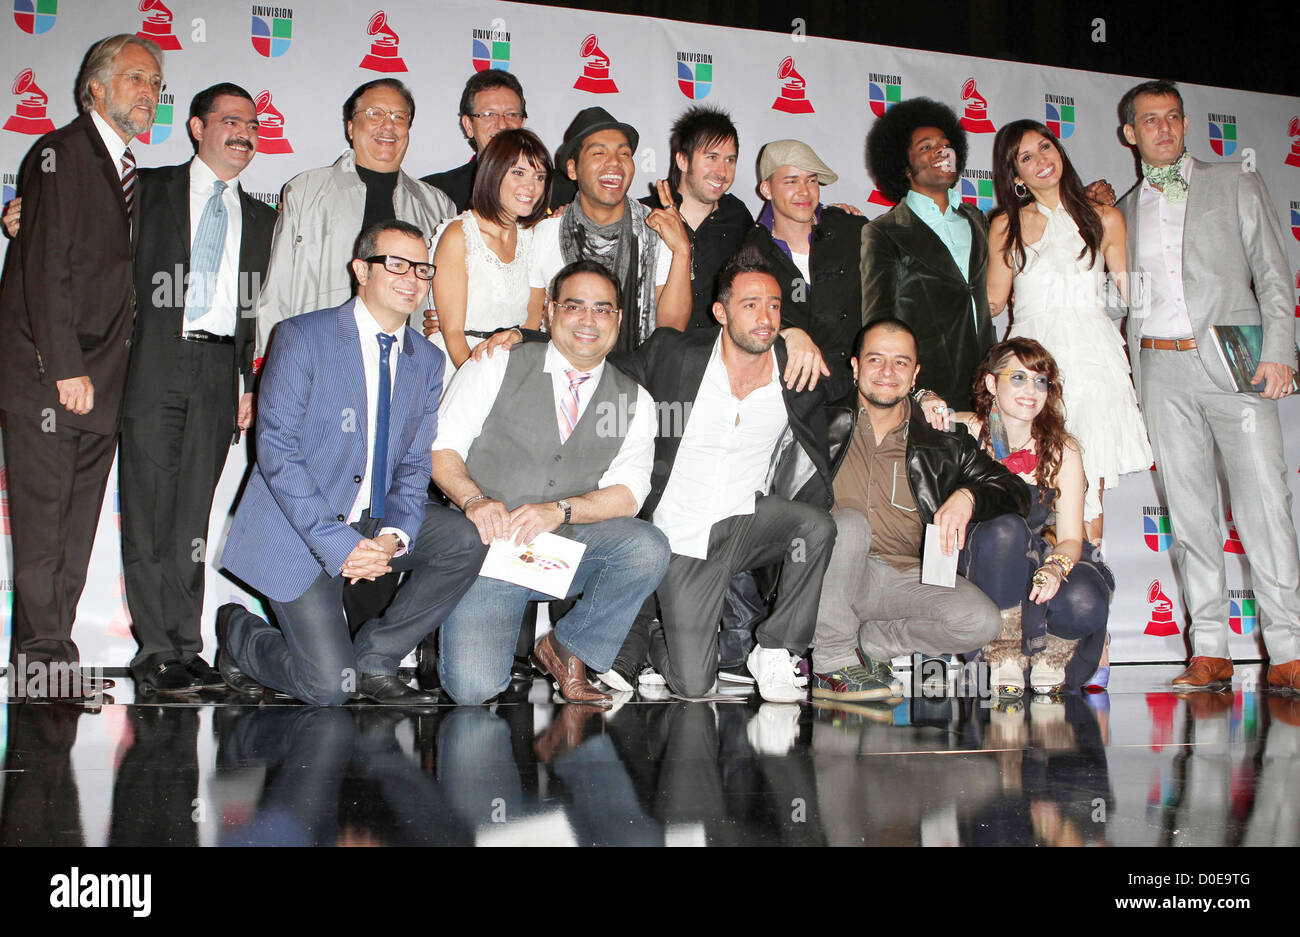 Presenters and hosts 11th Annual Latin Grammy Awards Nominations - held at Avalon - Press Conference Hollywood, California - Stock Photo